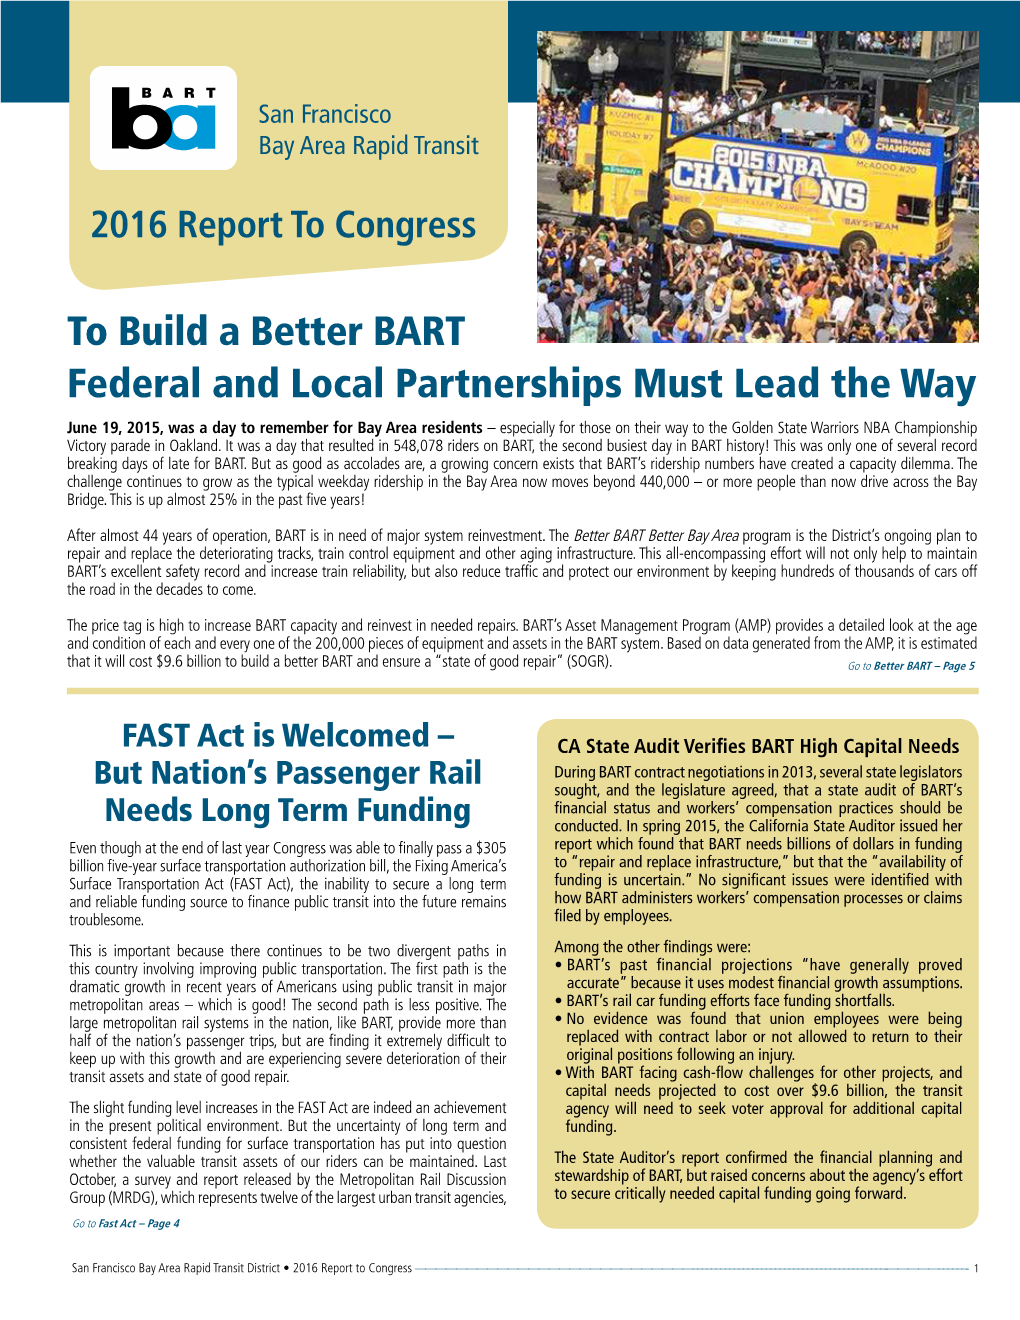 To Build a Better BART Federal and Local Partnerships Must Lead The